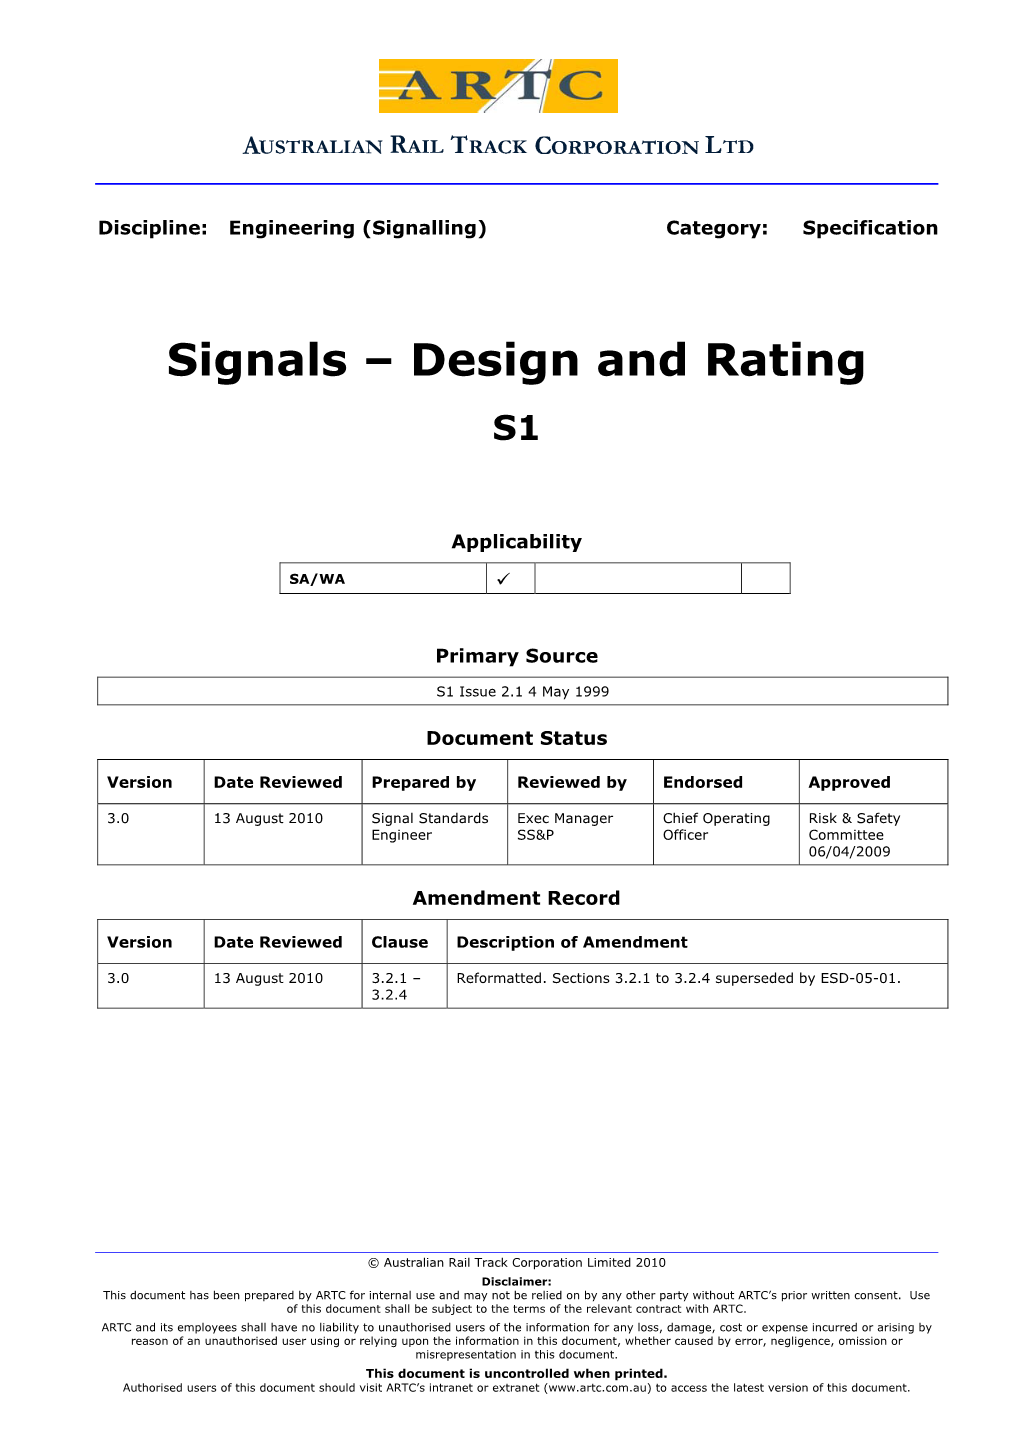 Signals – Design and Rating S1